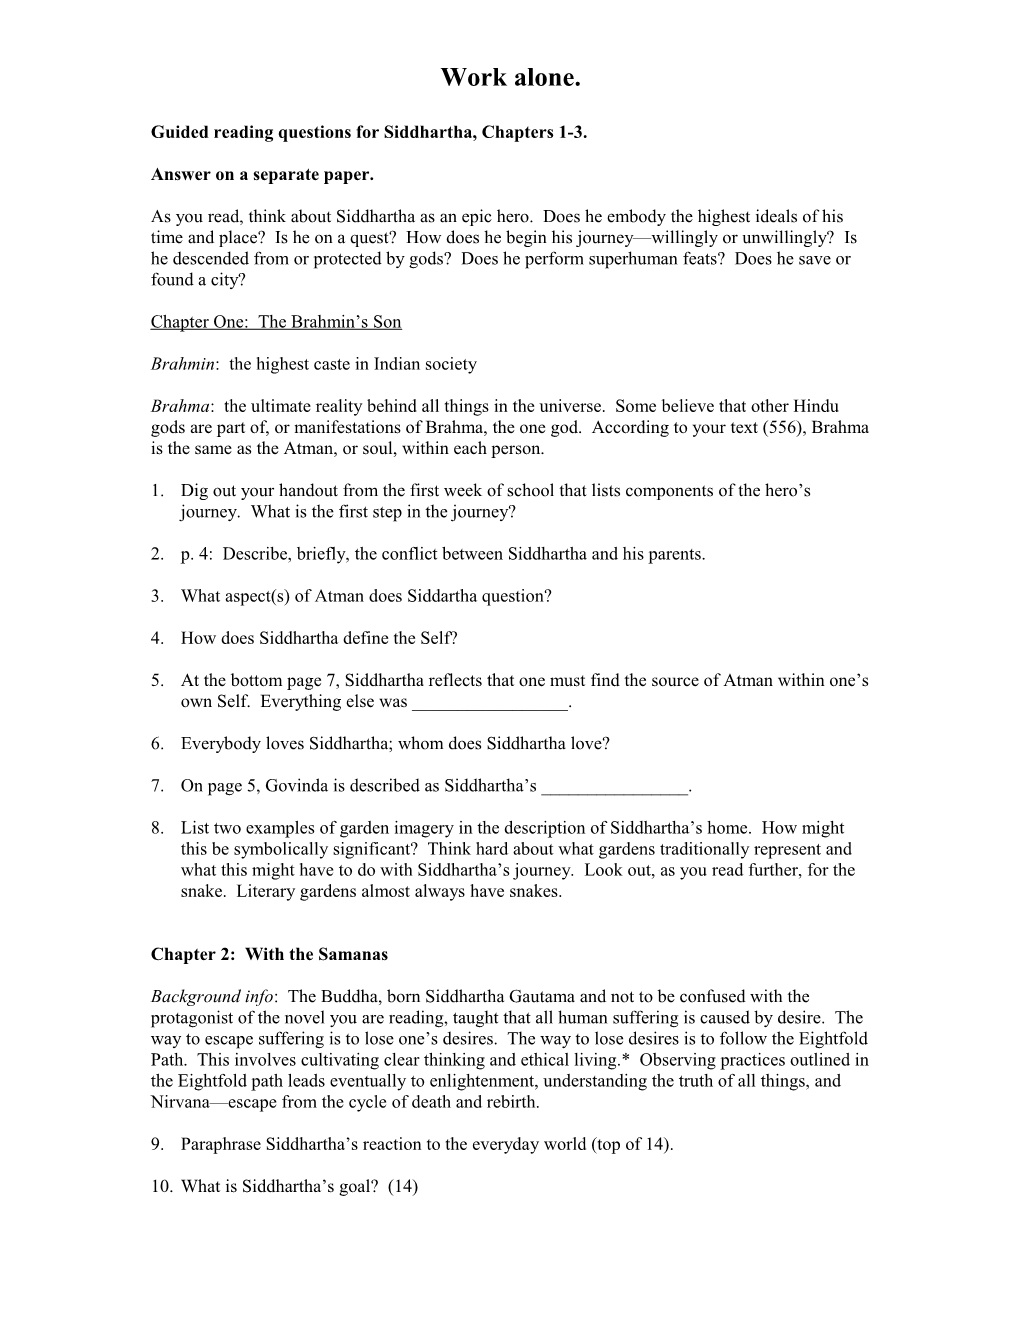 Guided Reading Questions for Siddhartha, Chapters 1-3